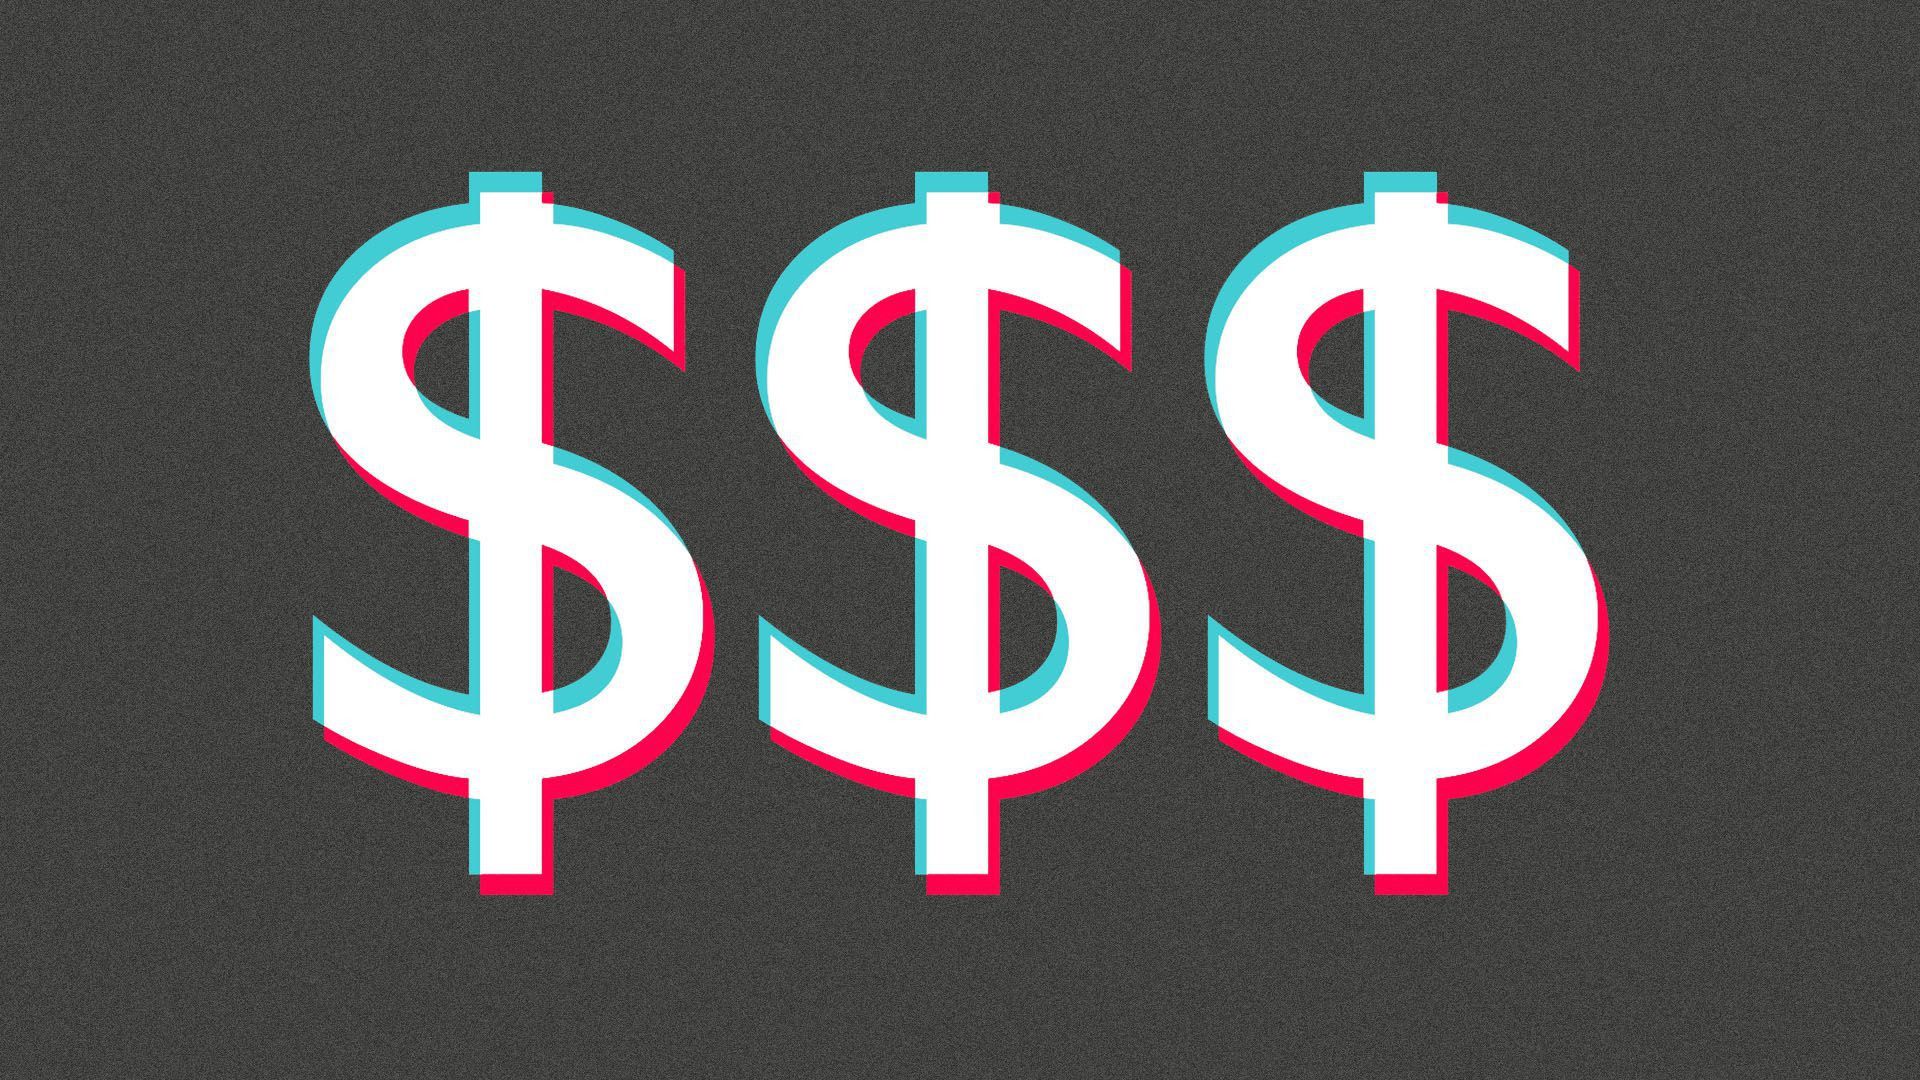 An illustration of dollar signs that look like the tiktok logo